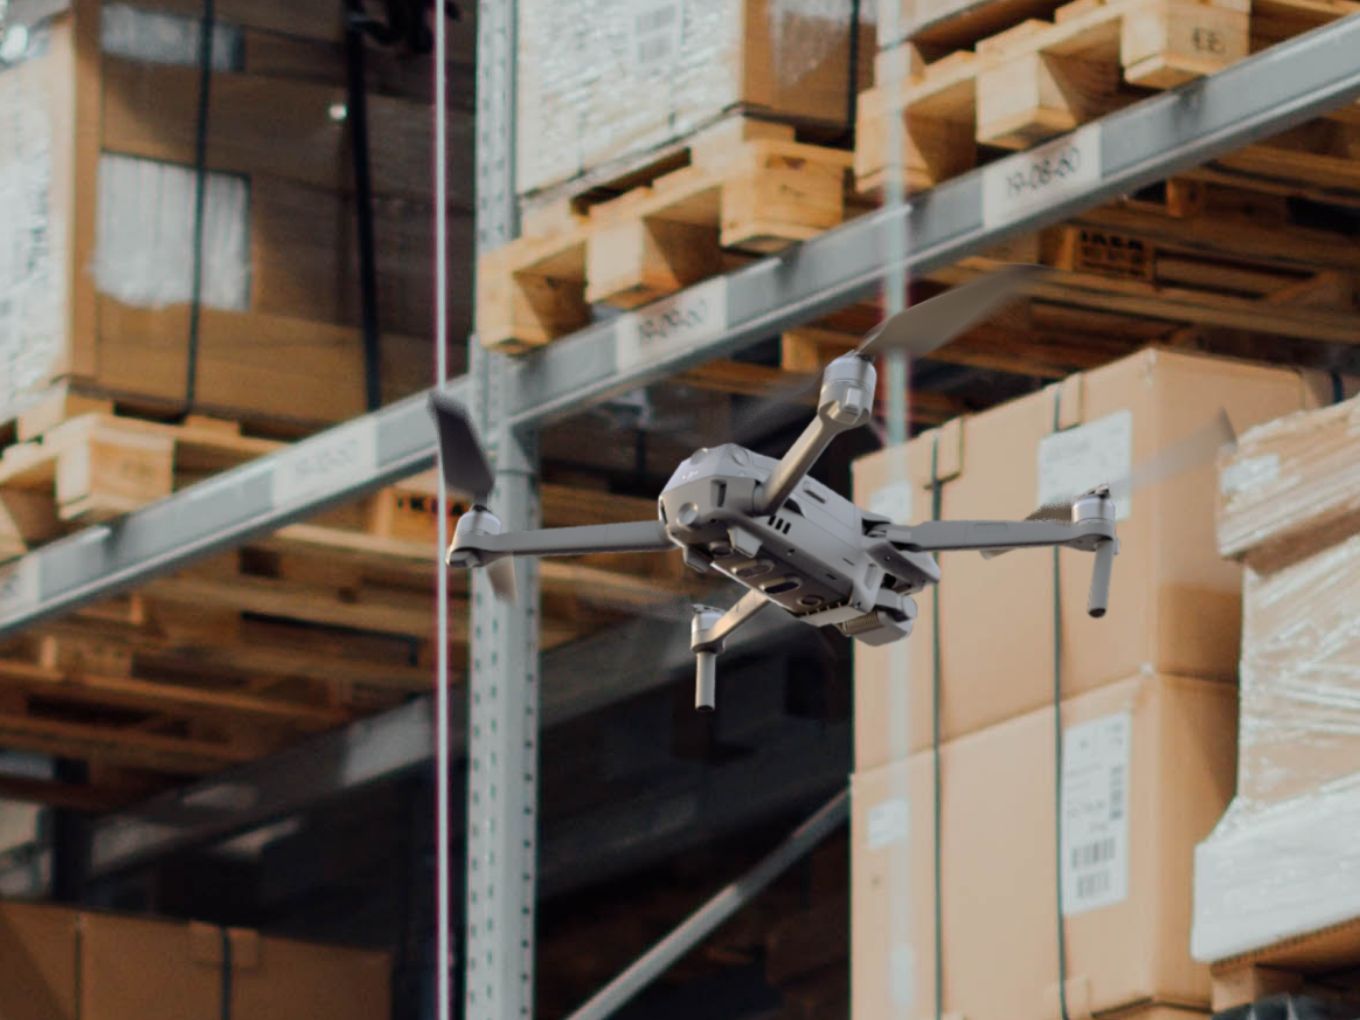 Drone Startup FlytBase Raises Seed Round For Commercial Applications